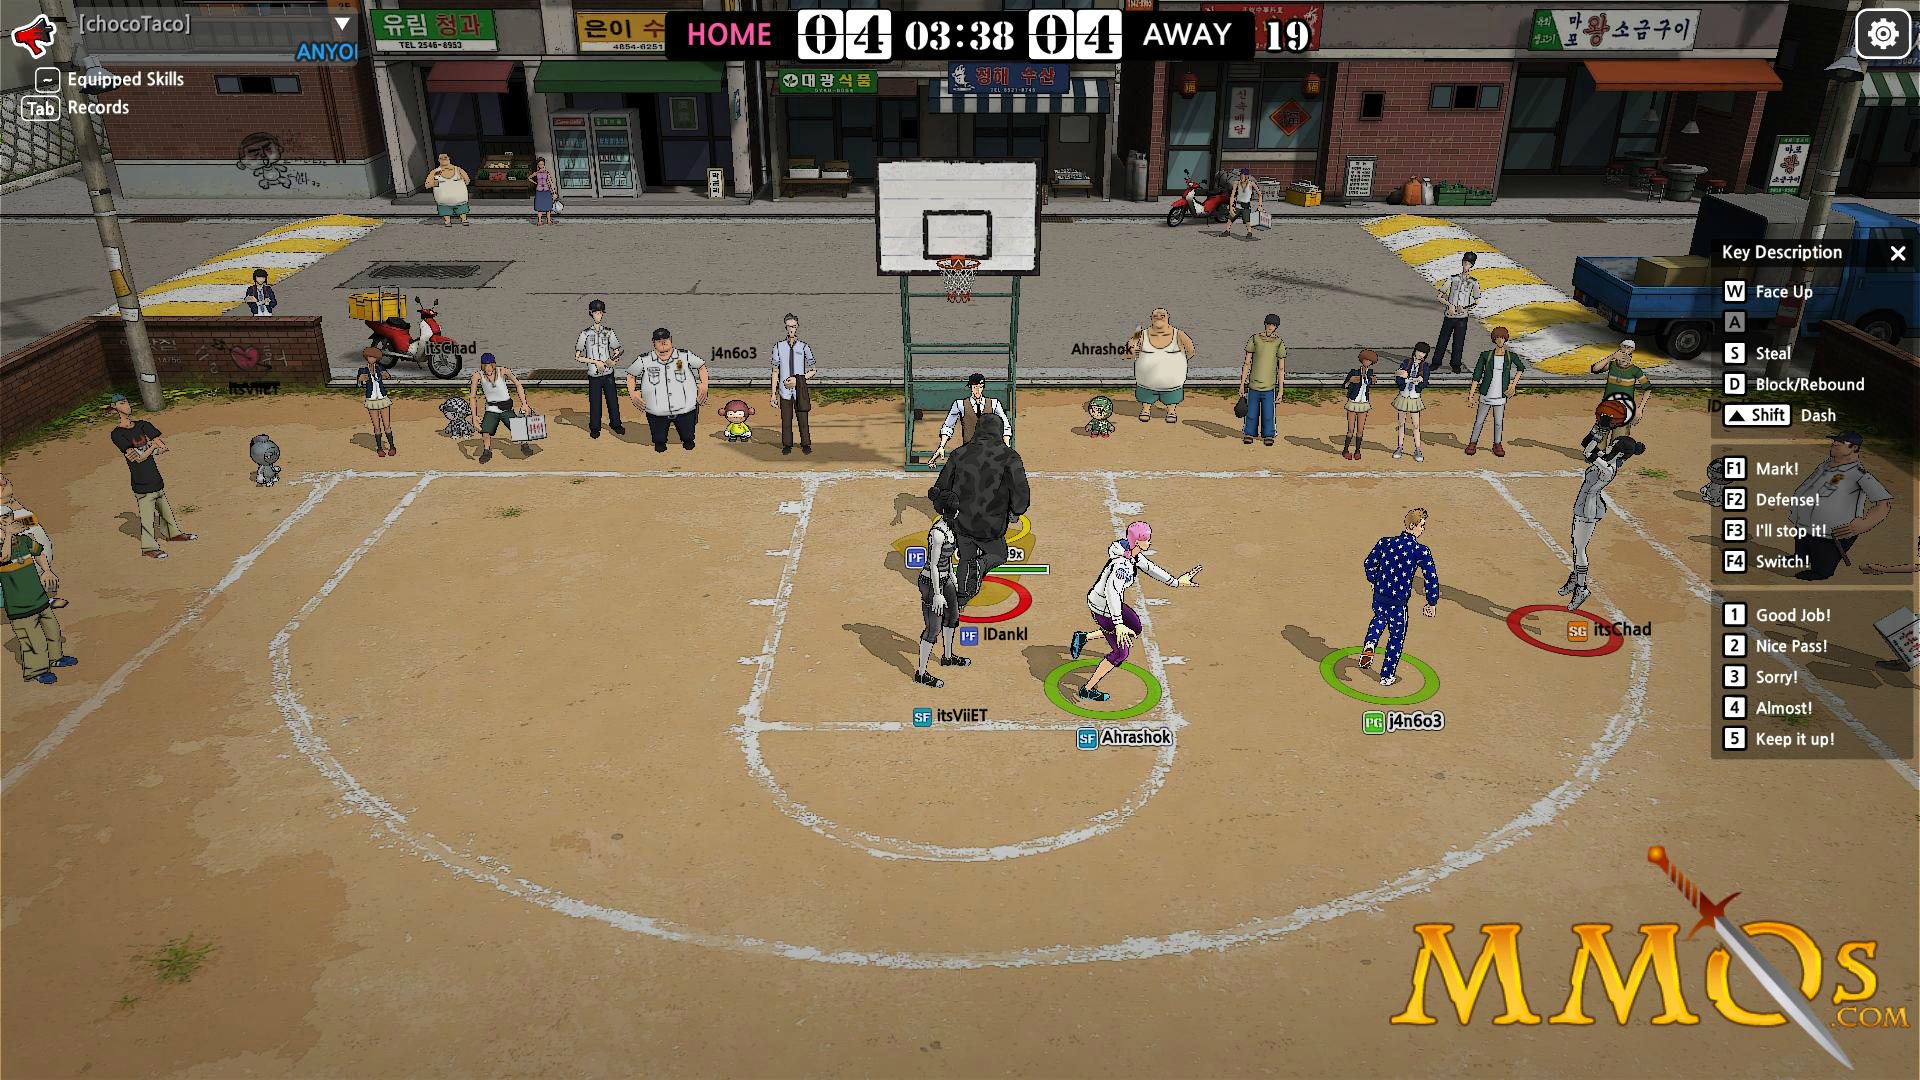 FreeStyle2: Street Basketball Pics, Video Game Collection